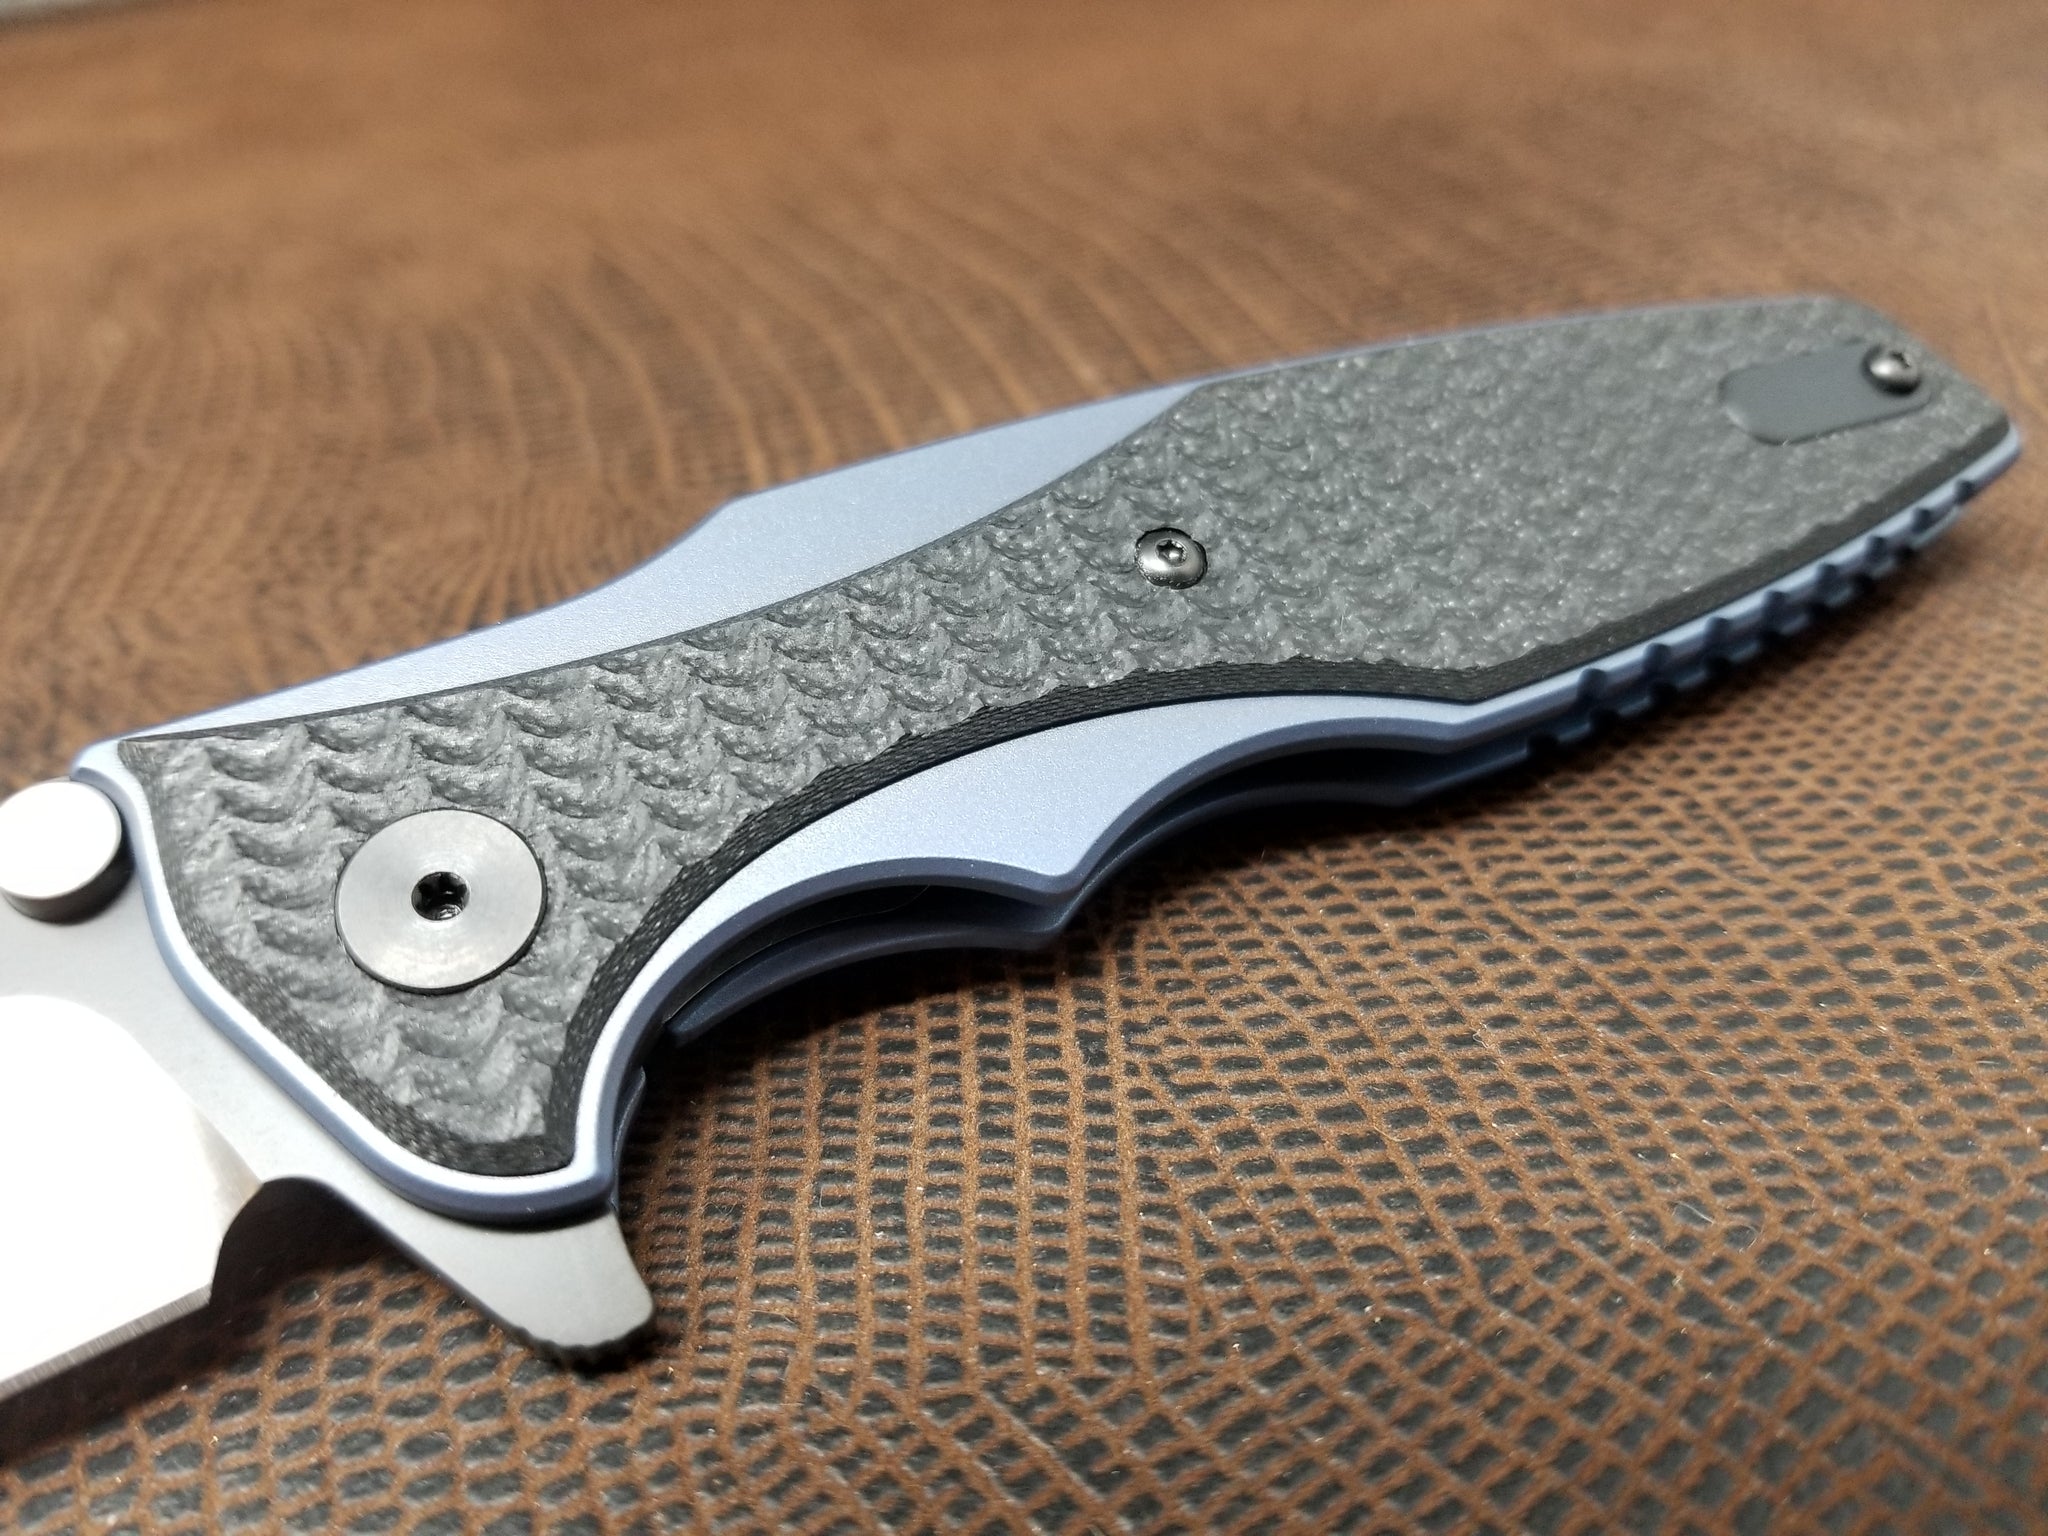 Download Standard knife from condition zero with case haranded